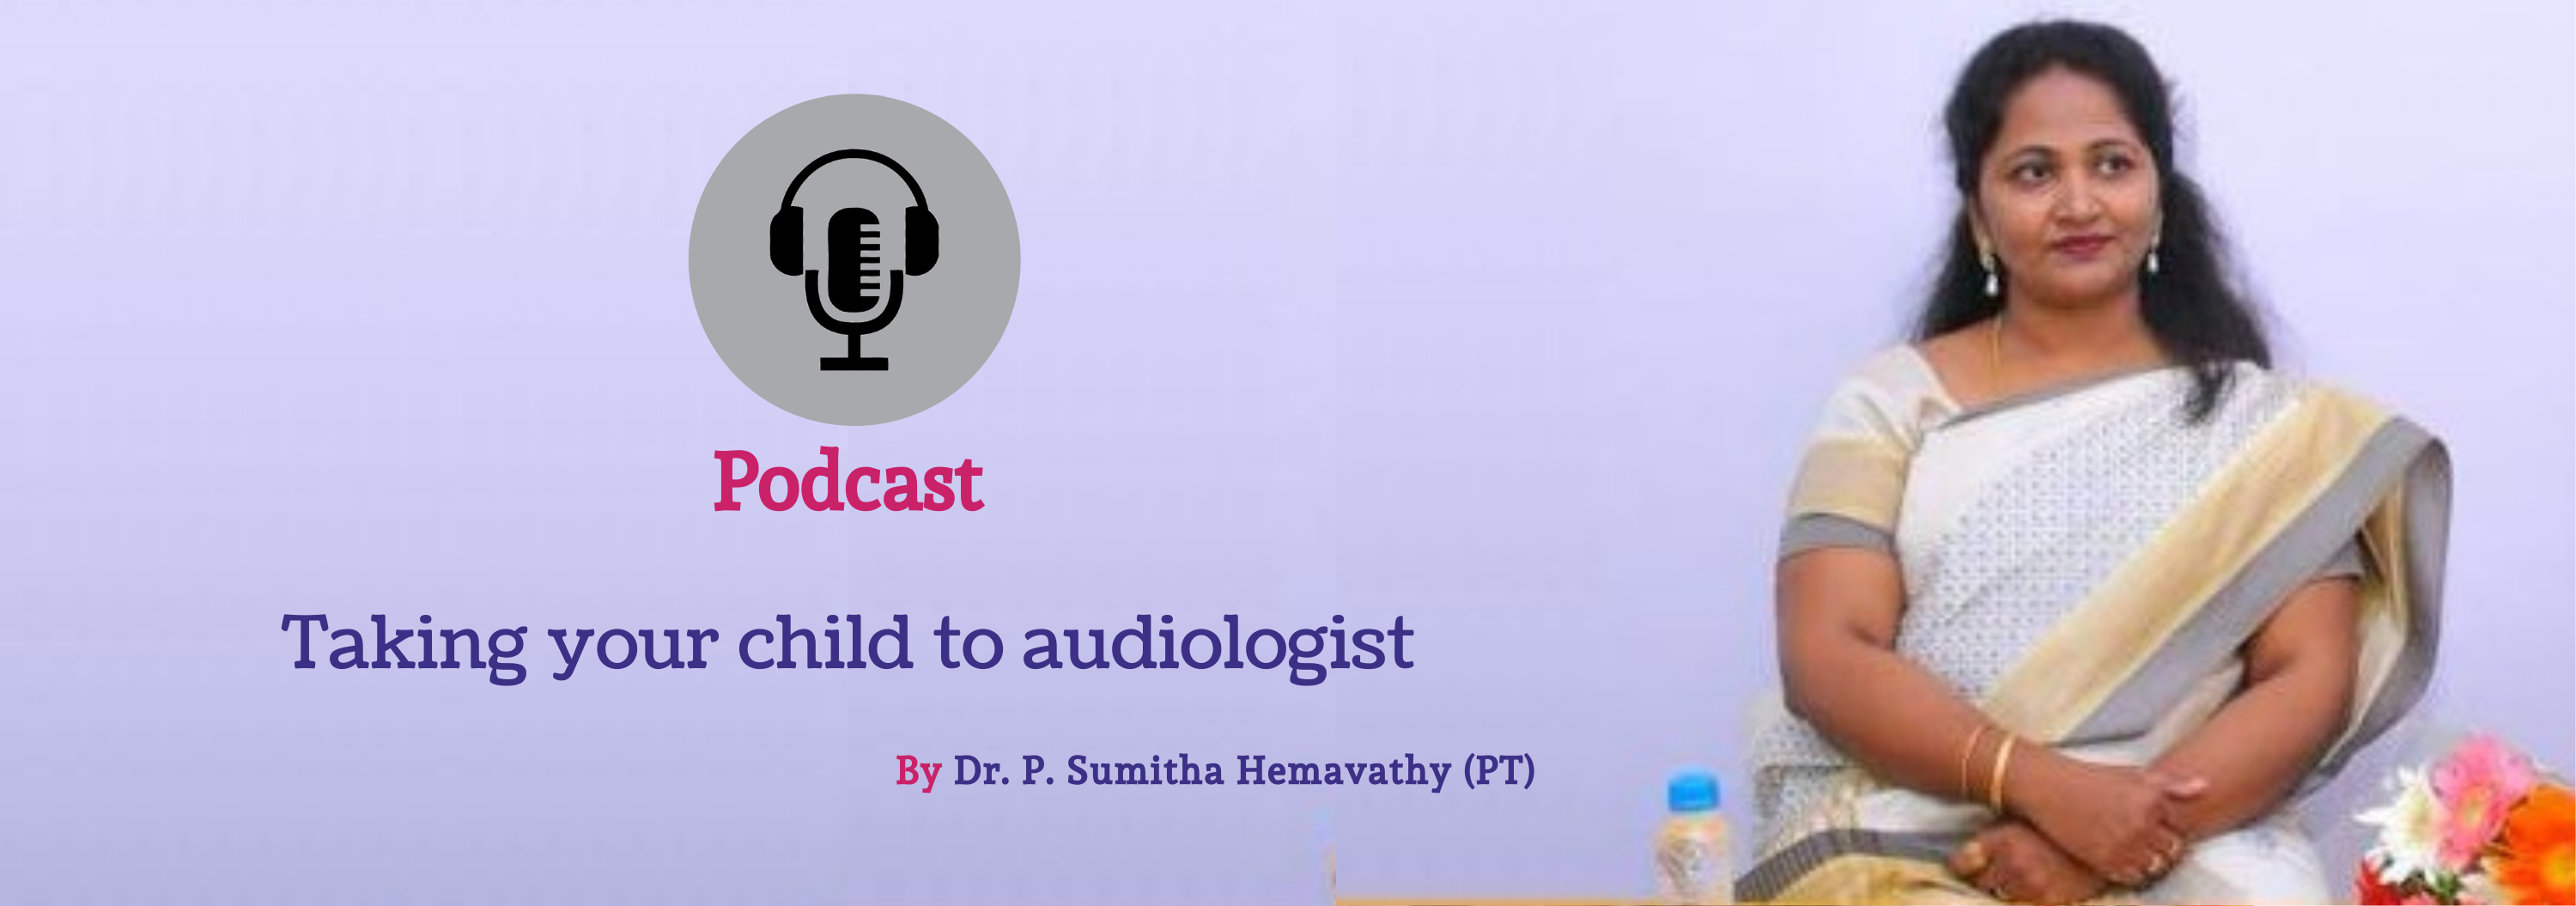 Podcast Audiology - Audiologists in Bangalore - CAPAAR